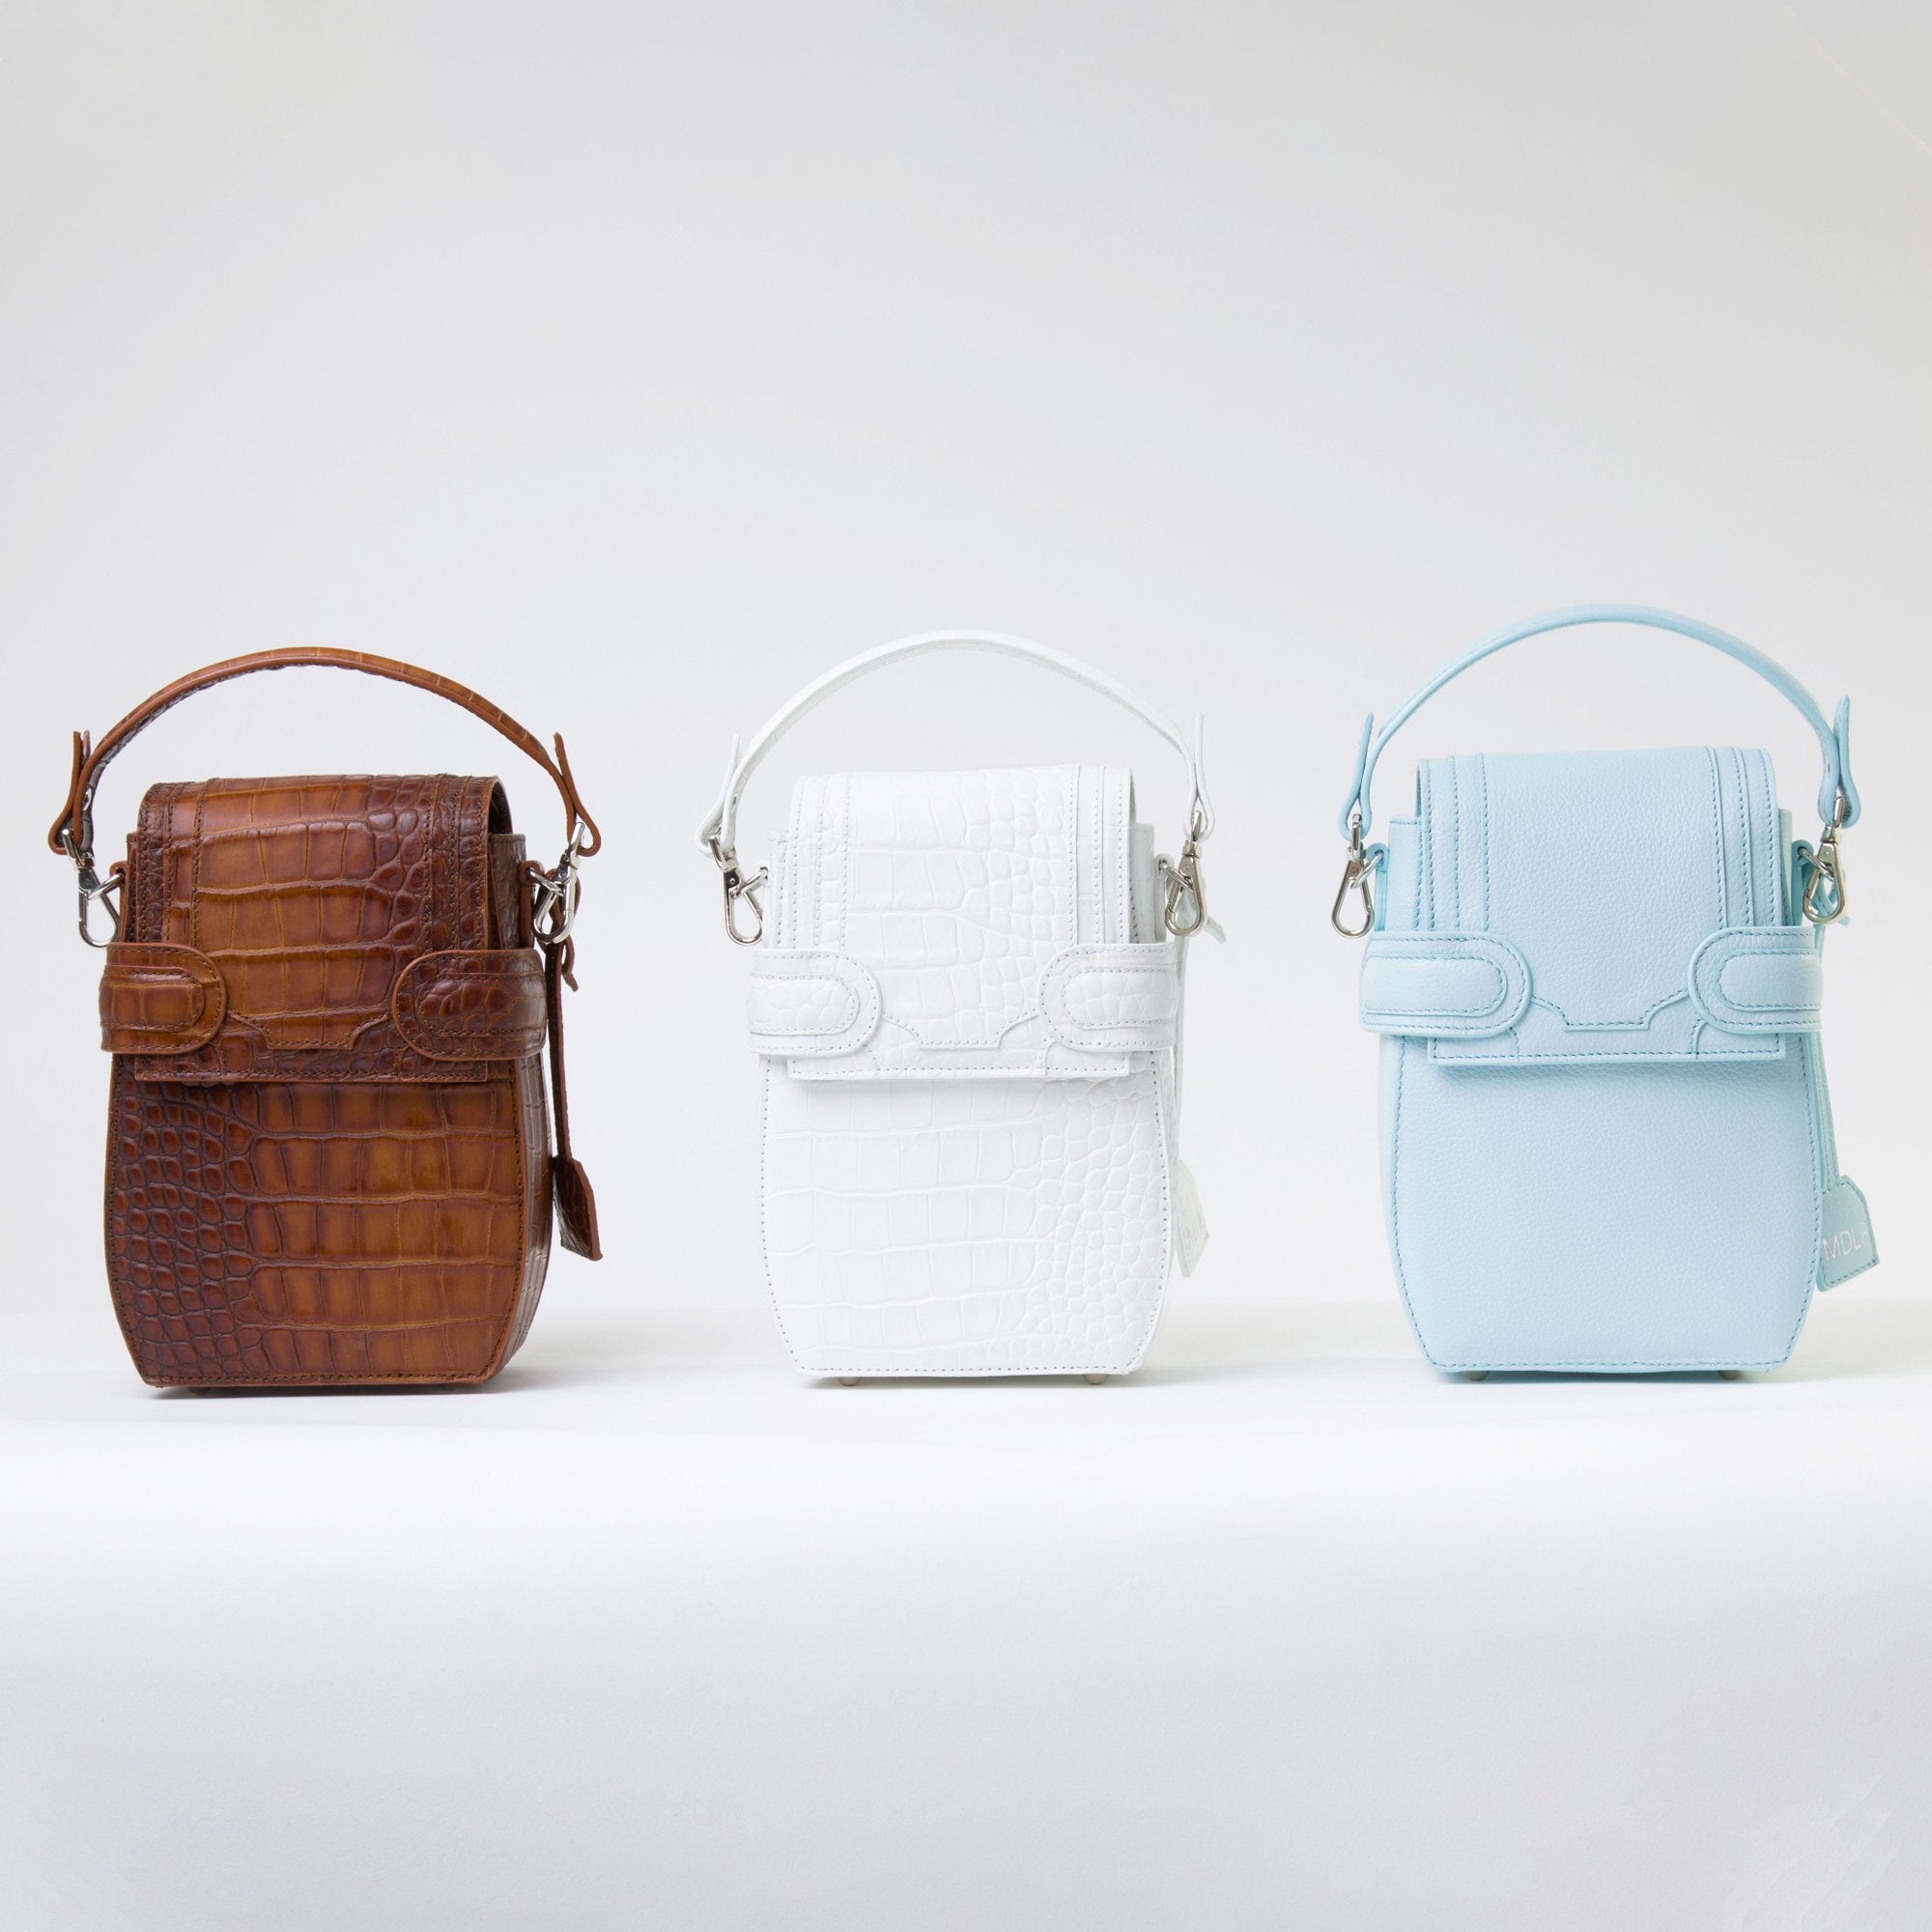 Collection of OCTAVIO 4 WAY BACKPACK, a fashionable backpack with minimalist look available in brown, blue and white